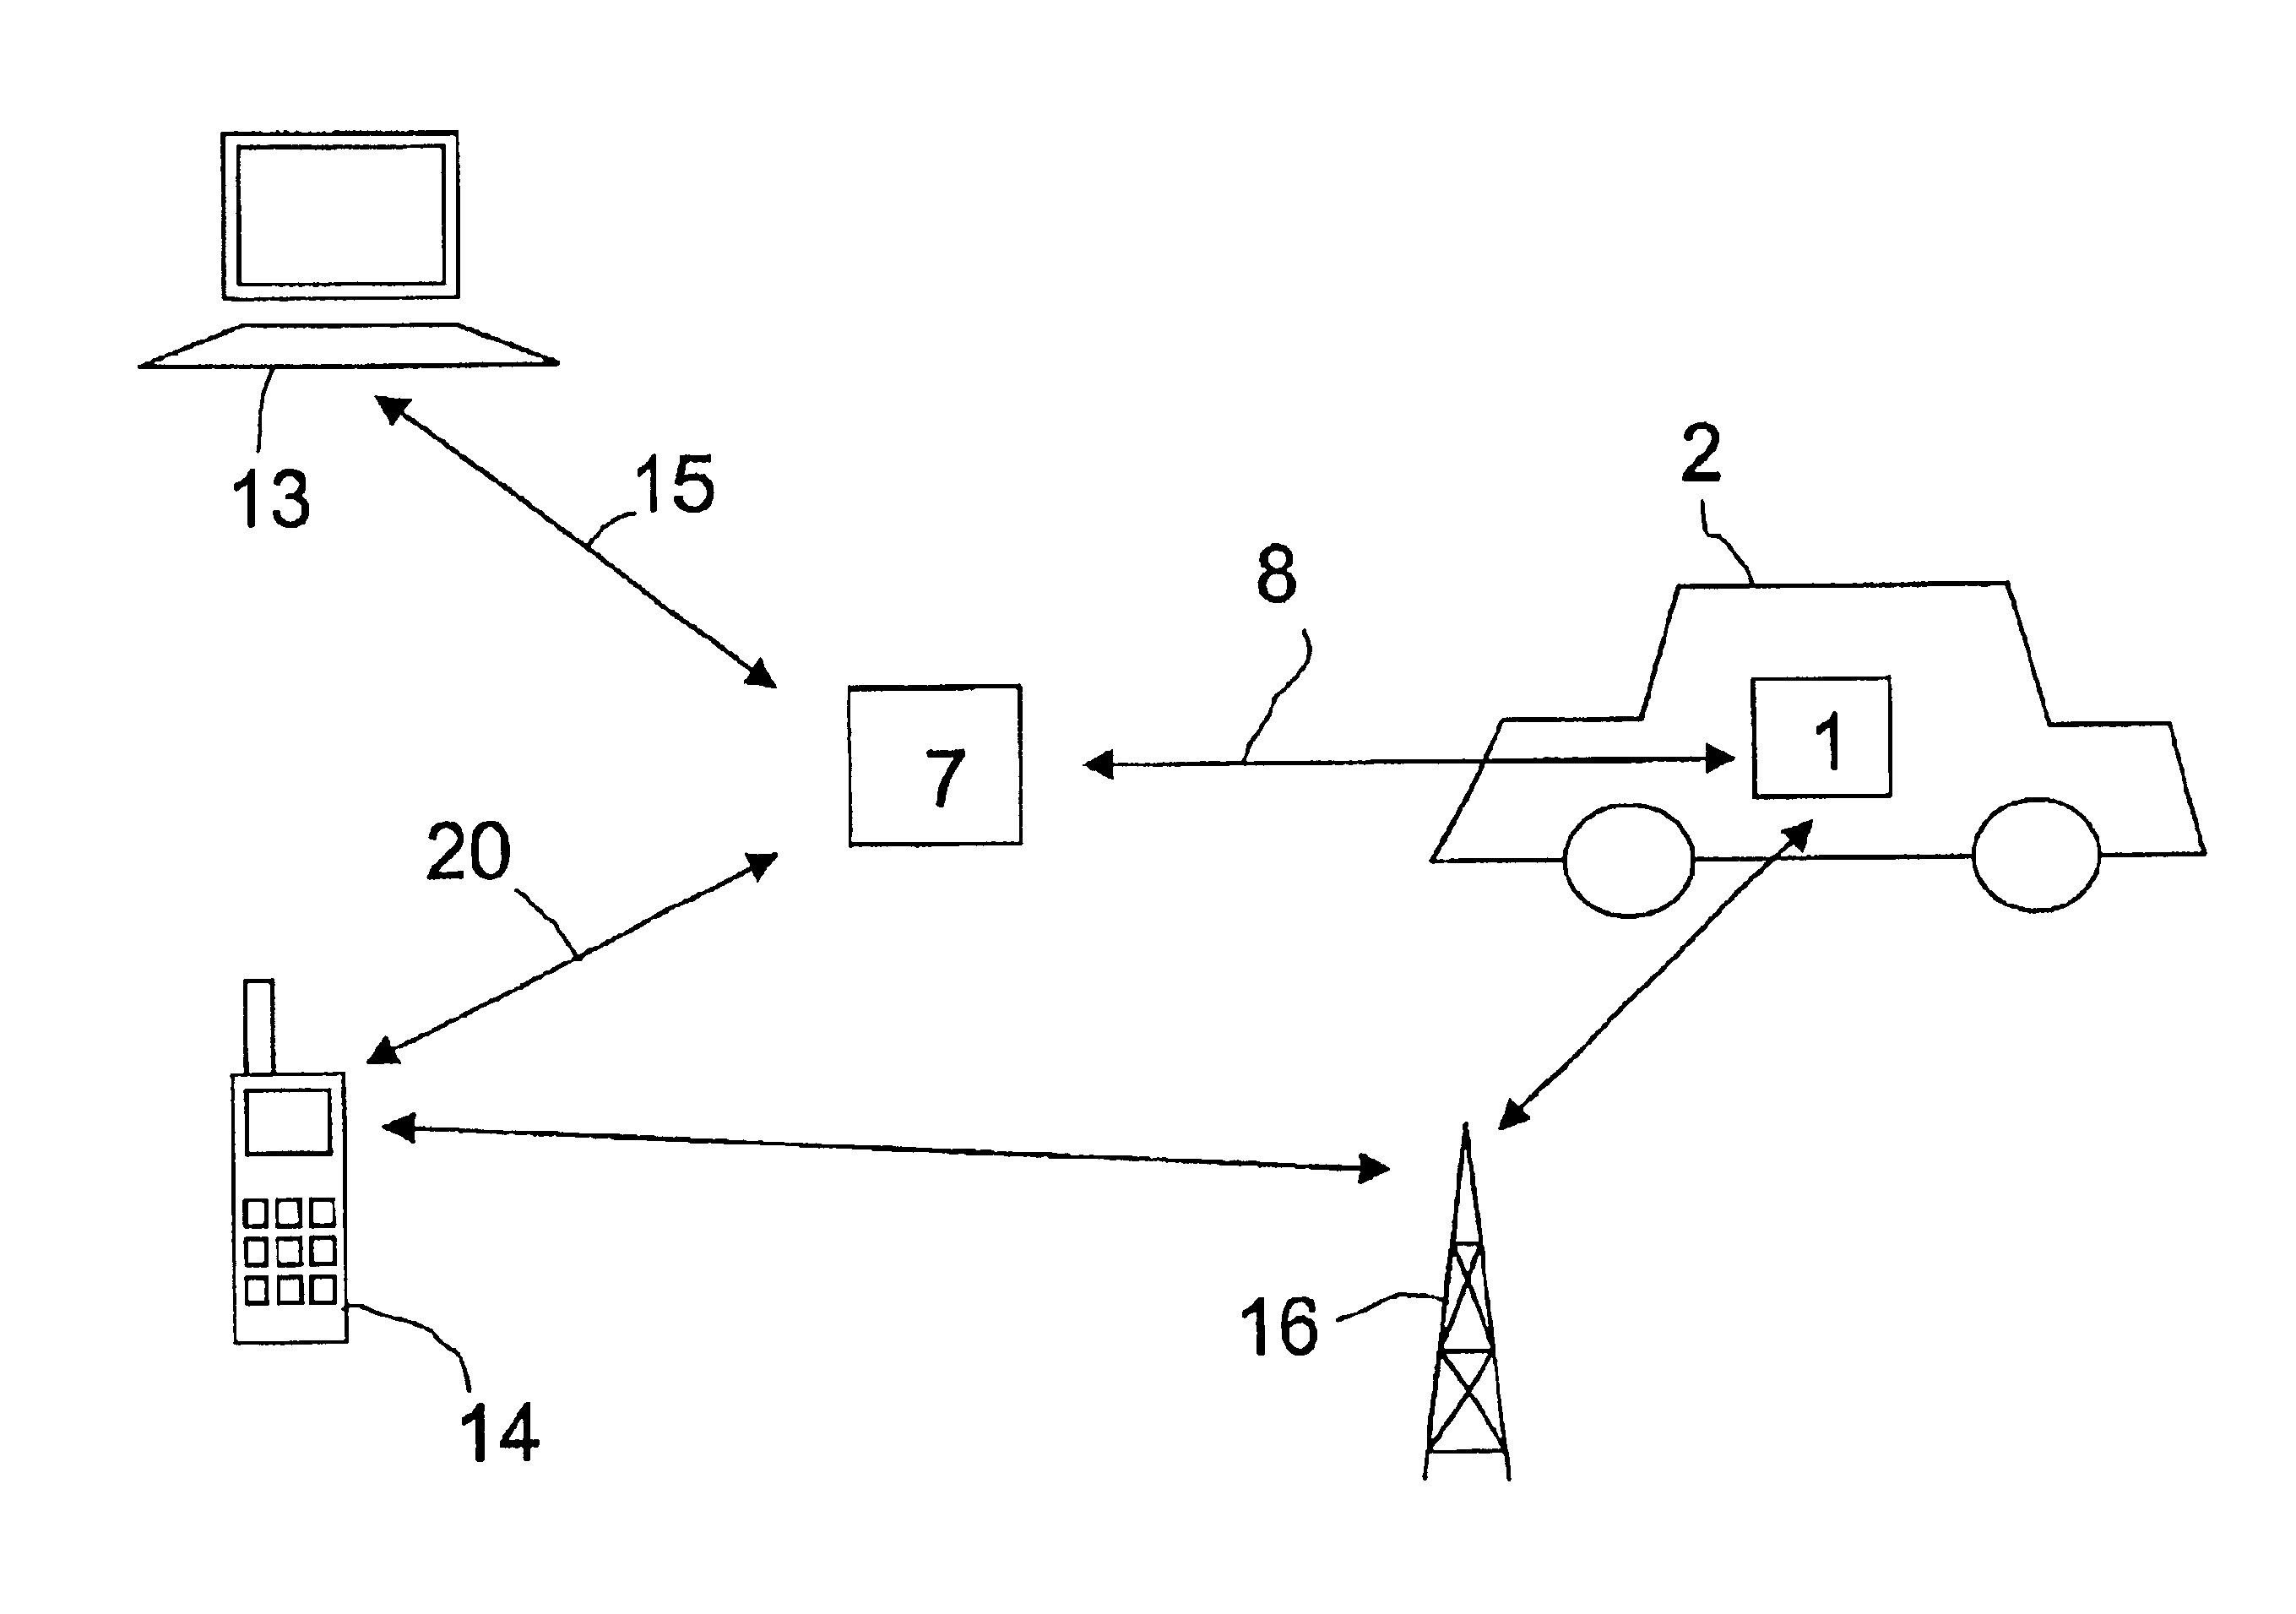 Communication system for use with a vehicle